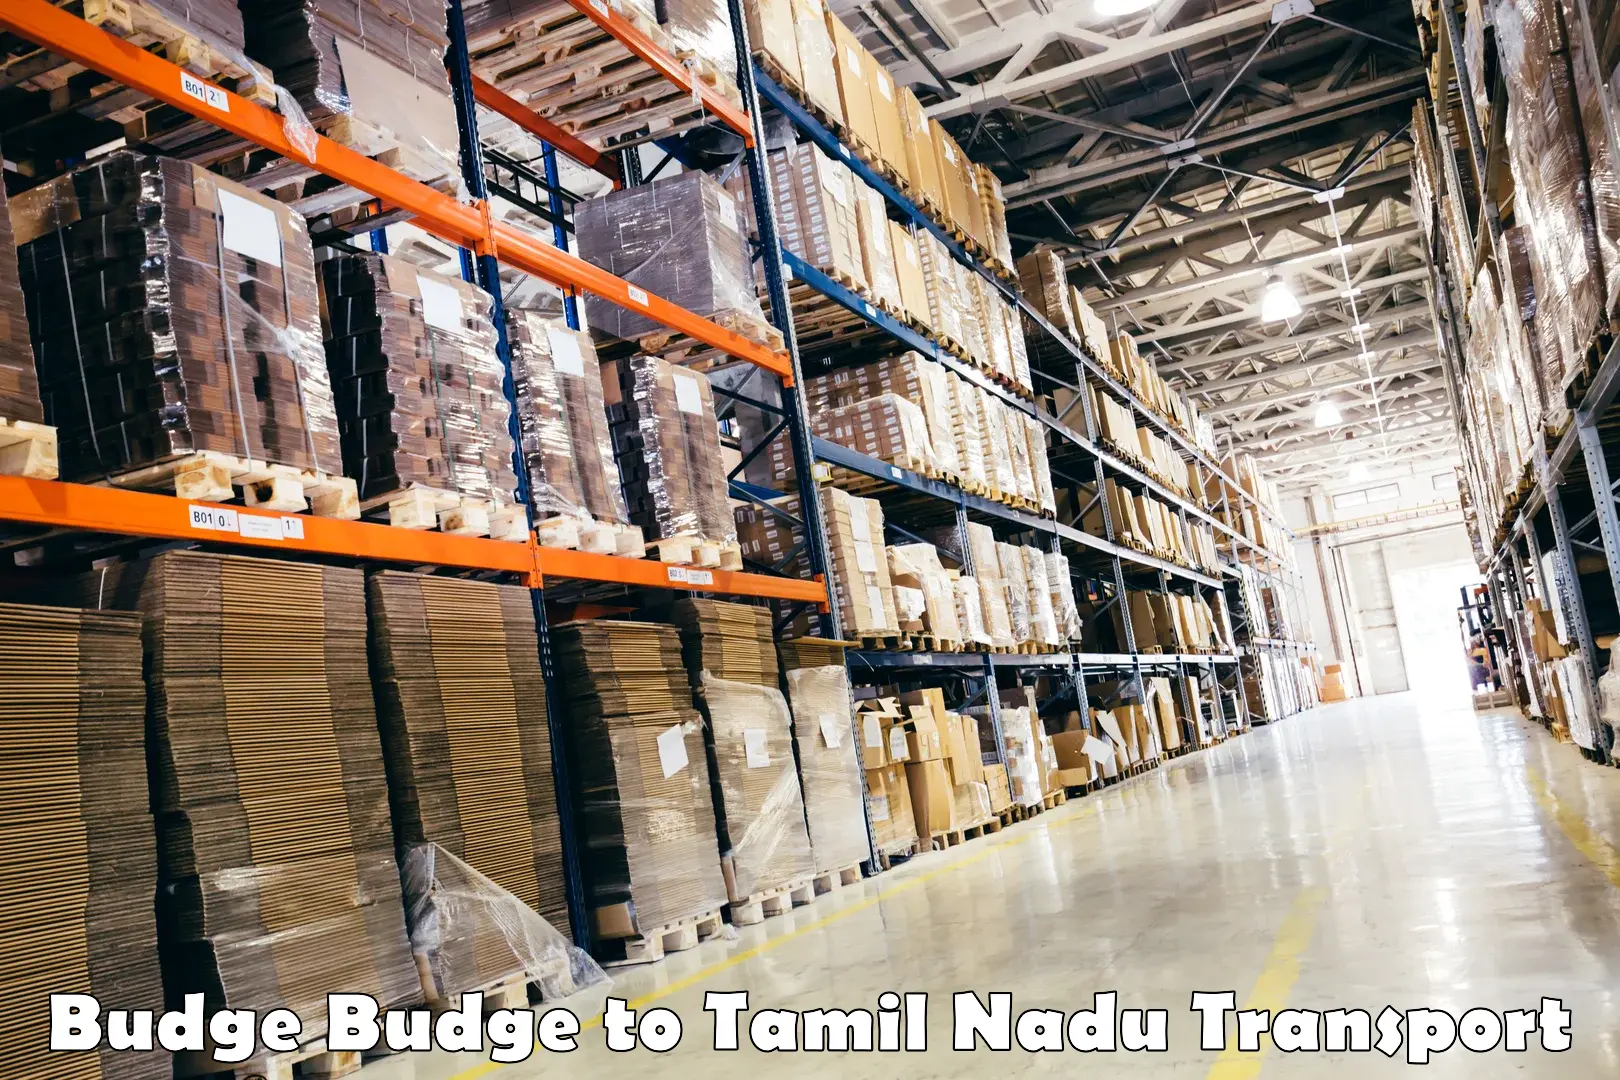 Pick up transport service in Budge Budge to Tamil Nadu